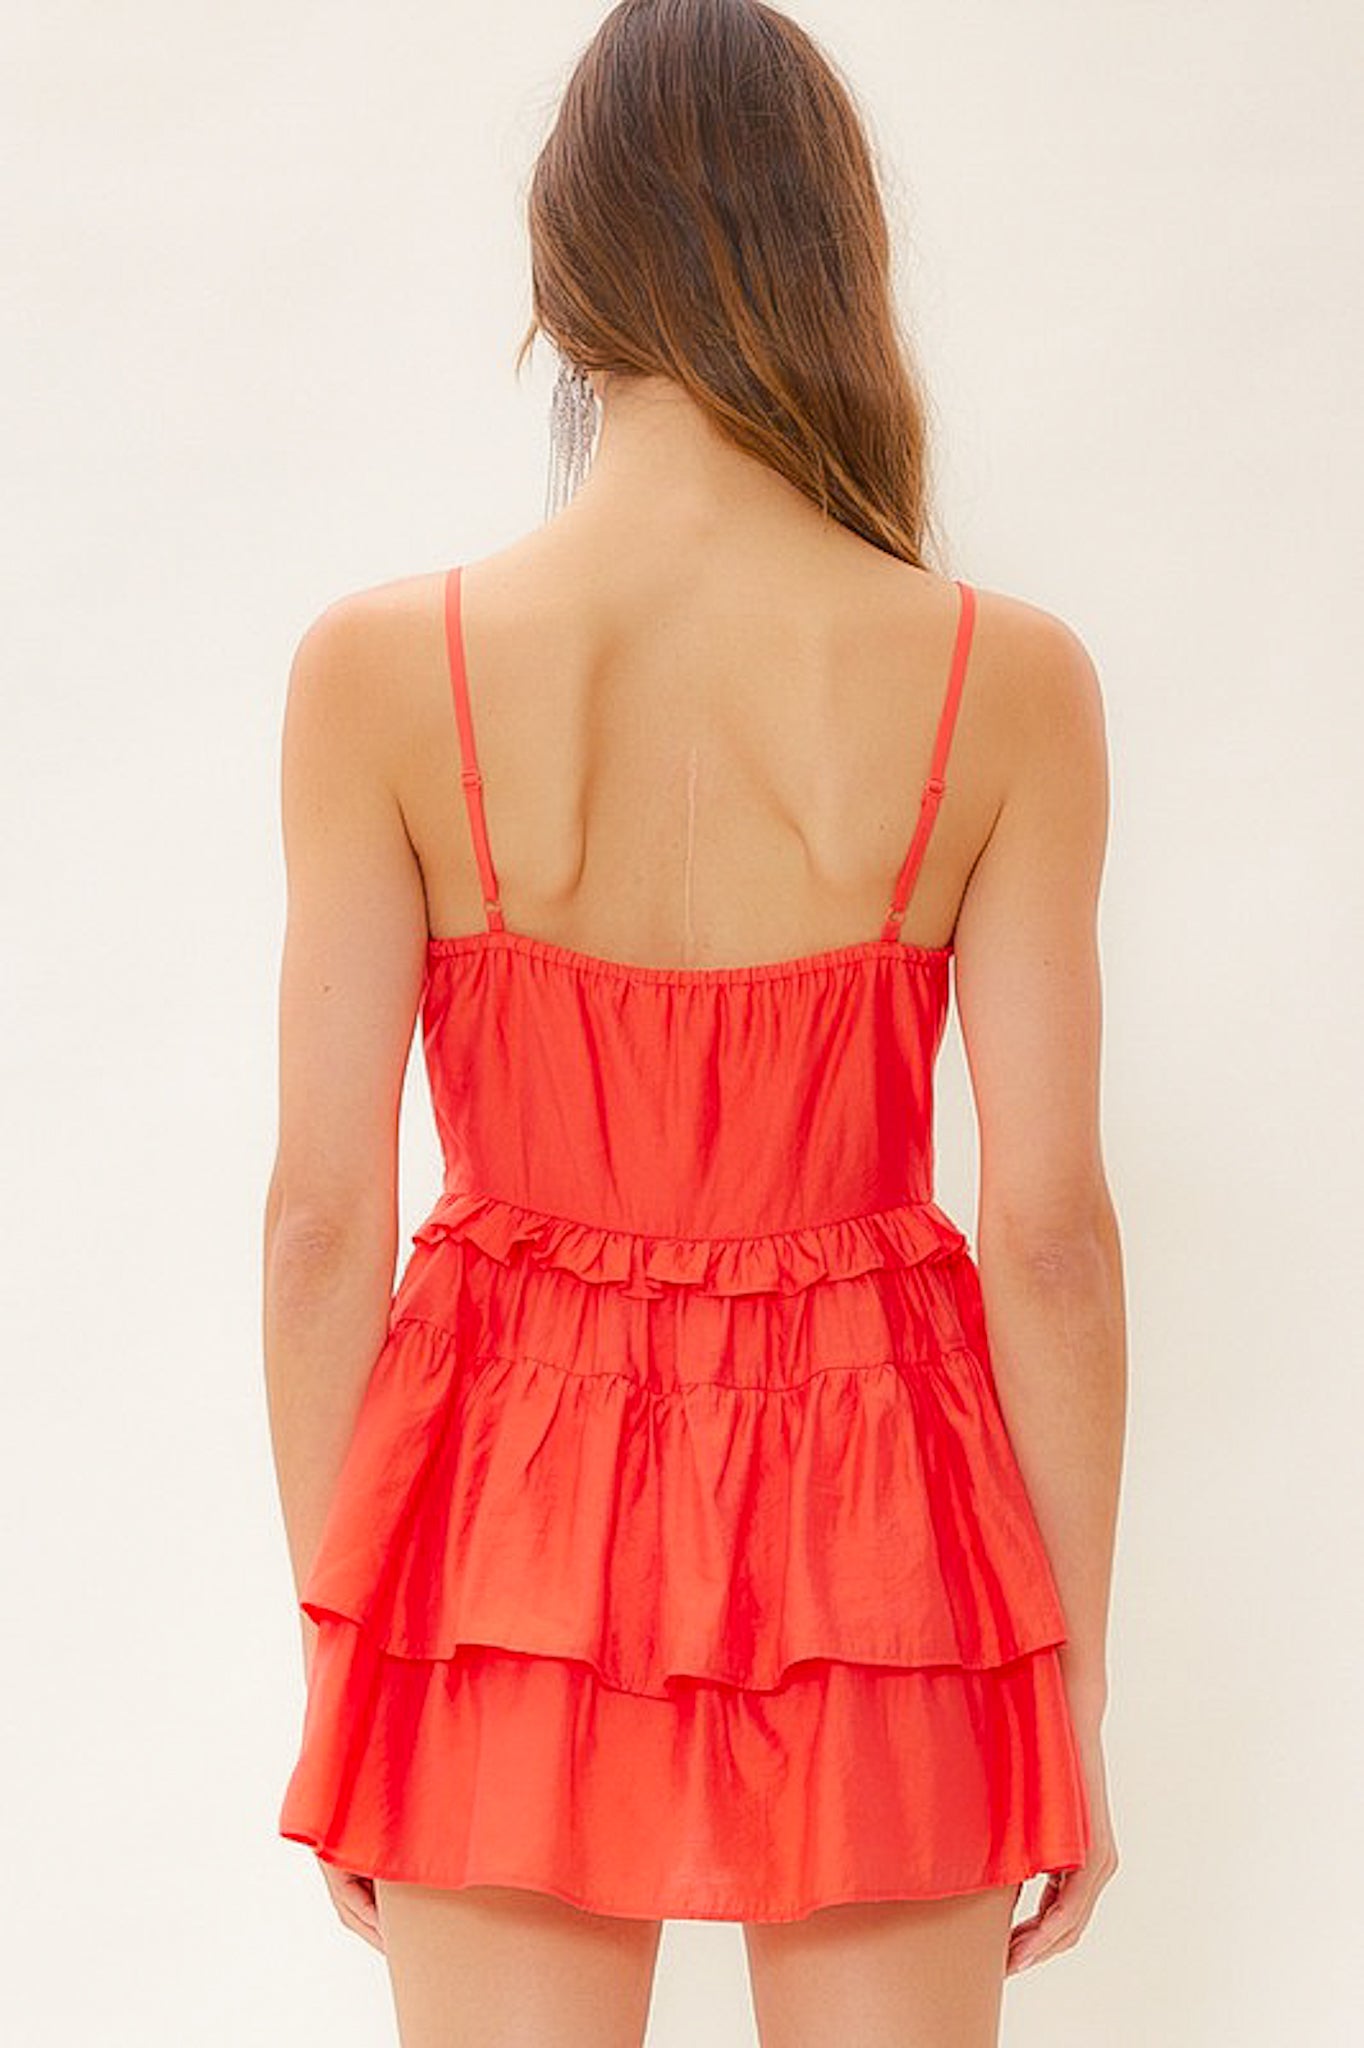 Ella Poppy Red Romper - Jumpsuits & Rompers - essecoco